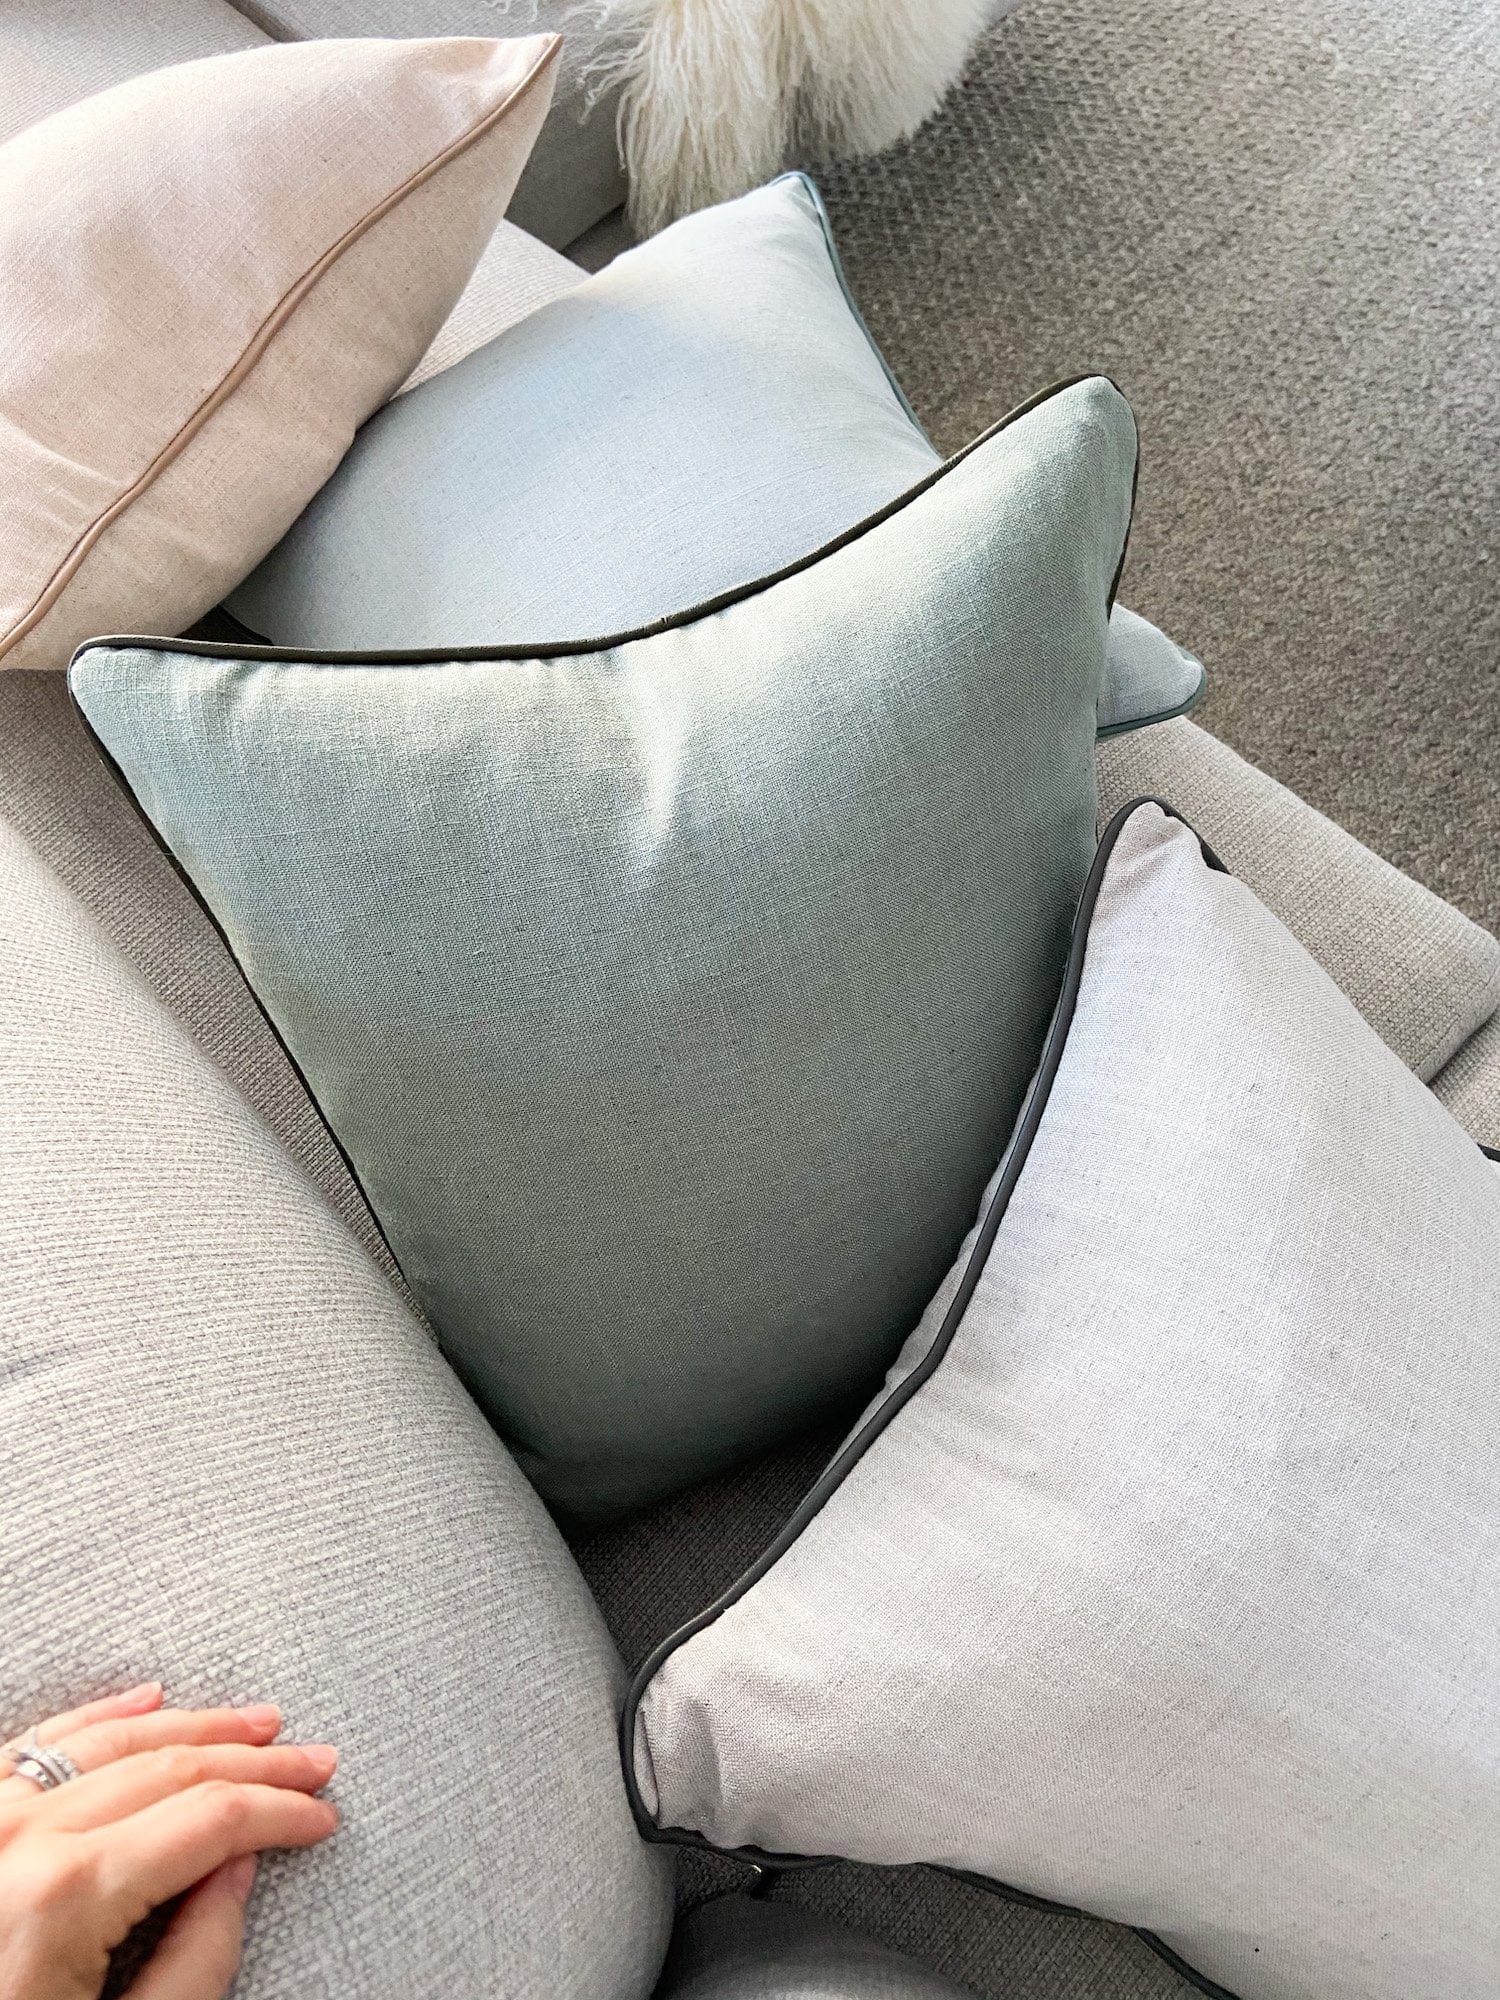 norsu Cushion, Lexus Seagrass with Olive Leather Piping - Norsu Interiors (4753701240916)